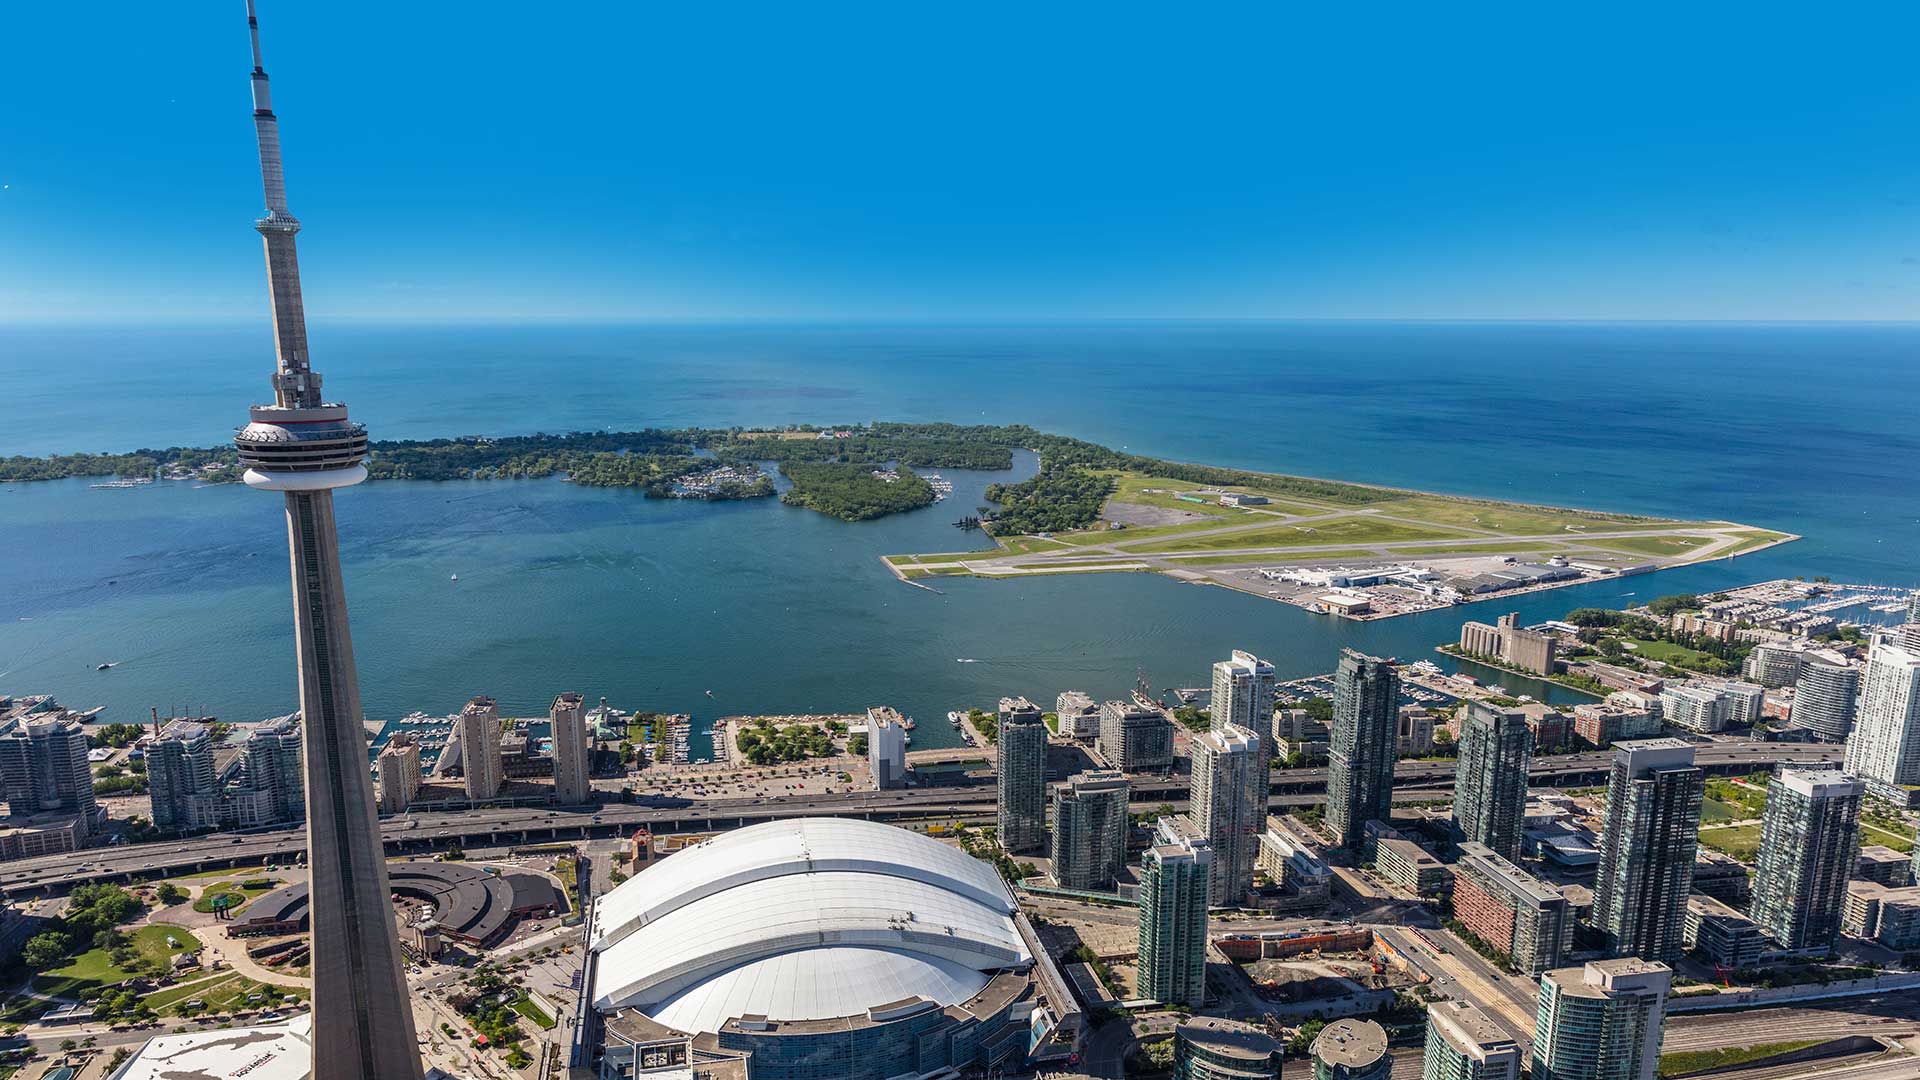 Billy Bishop Toronto City Airport Launches New Website